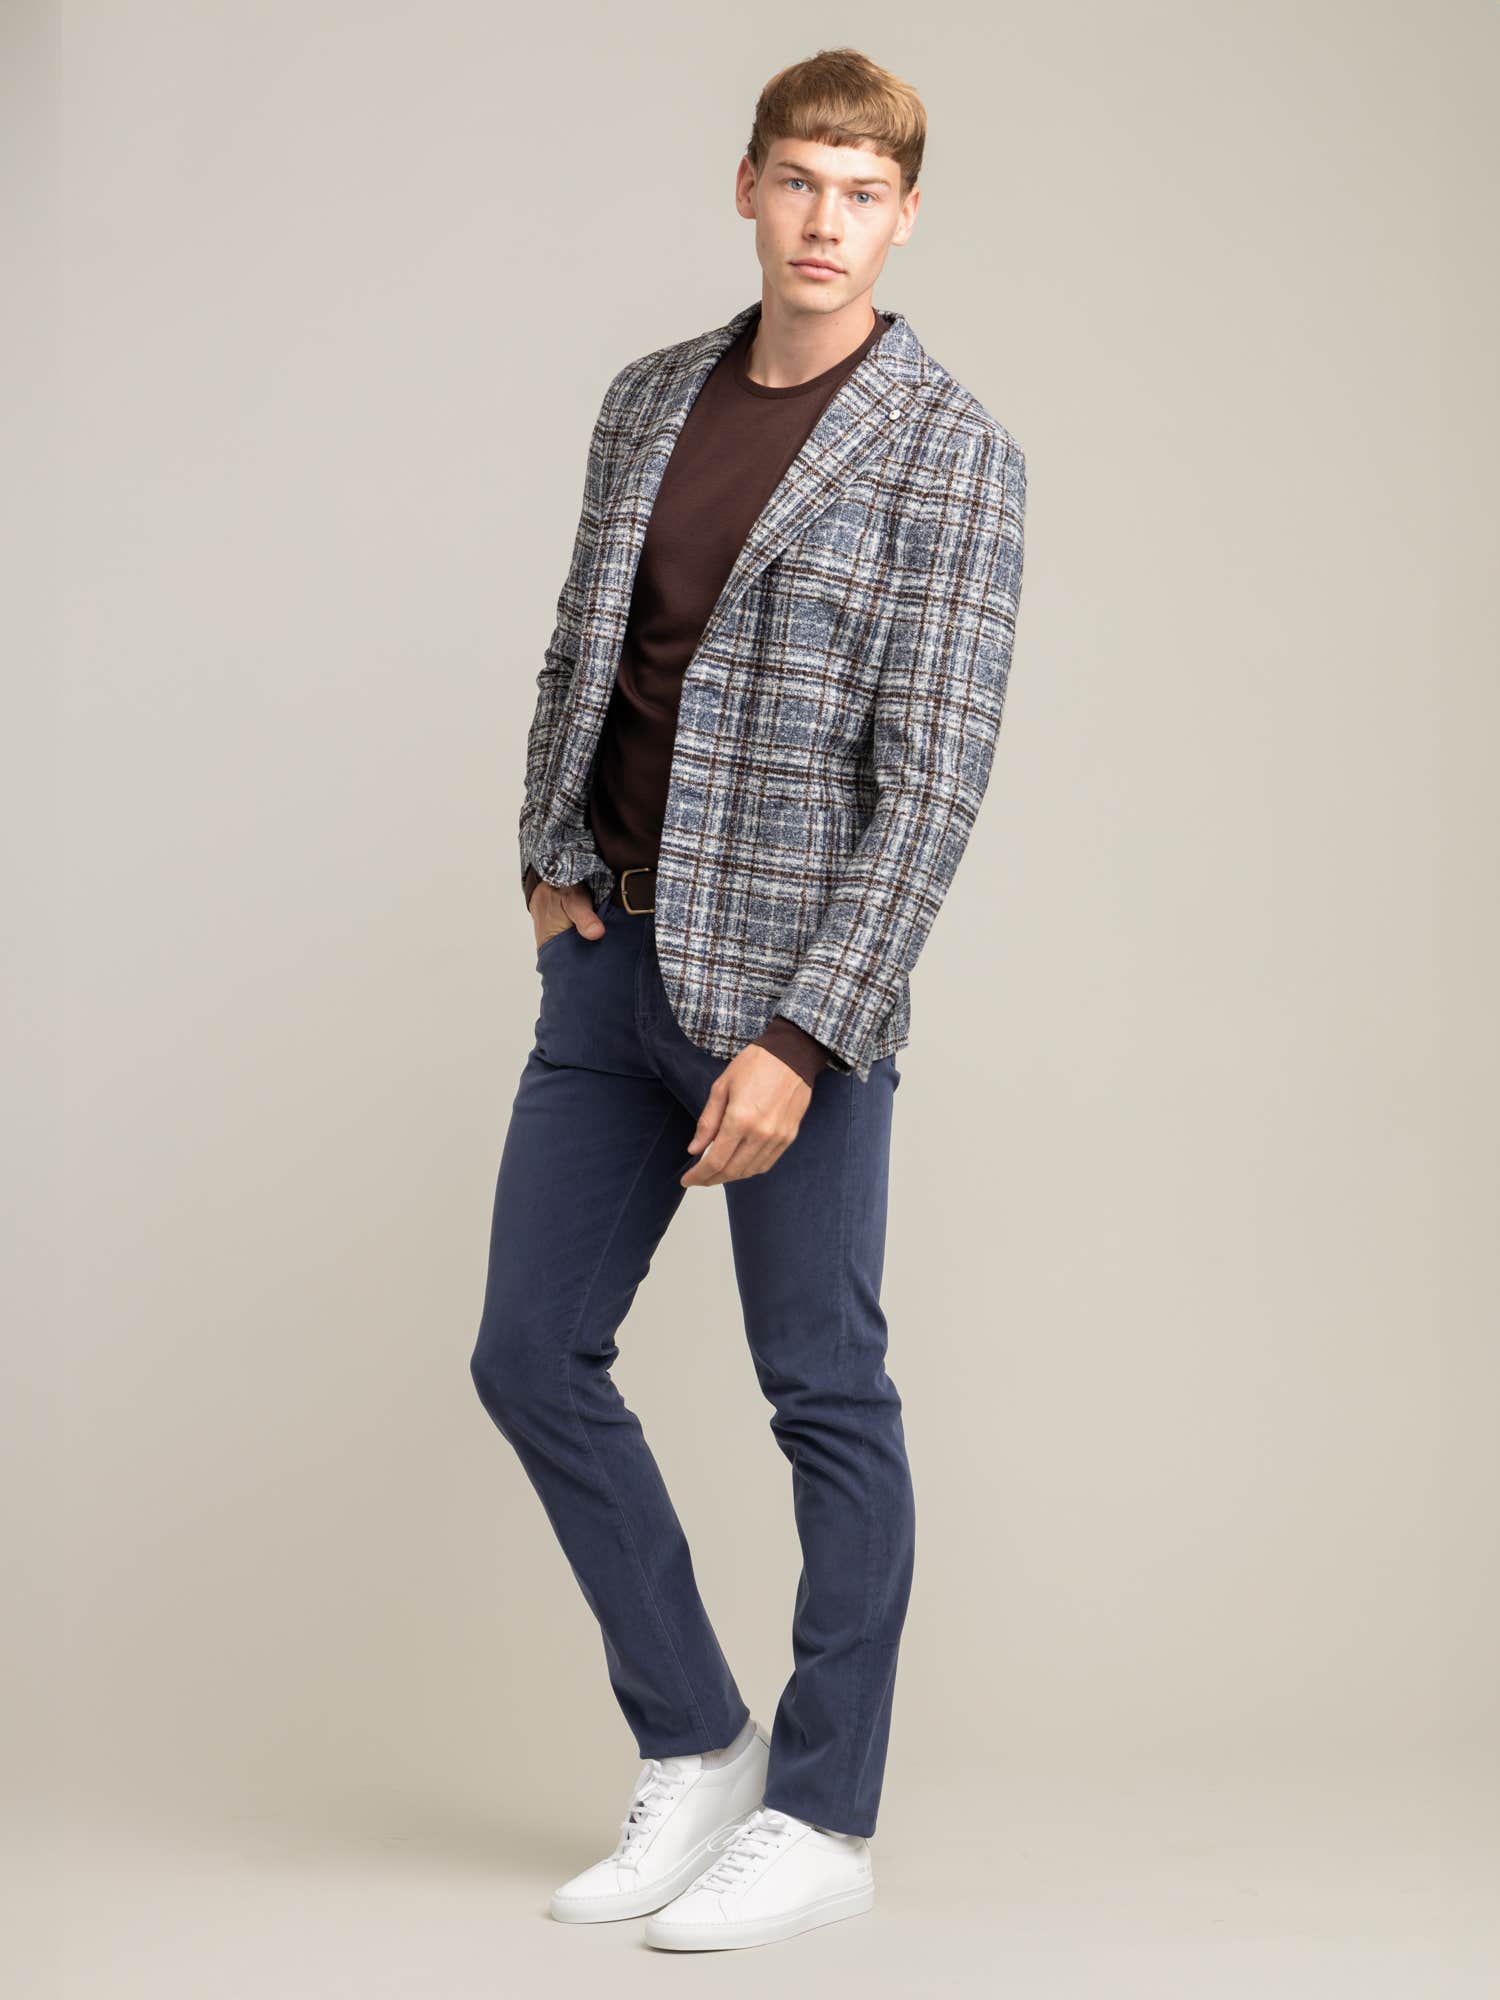 Exploded Plaid Textured Dandy Jacket